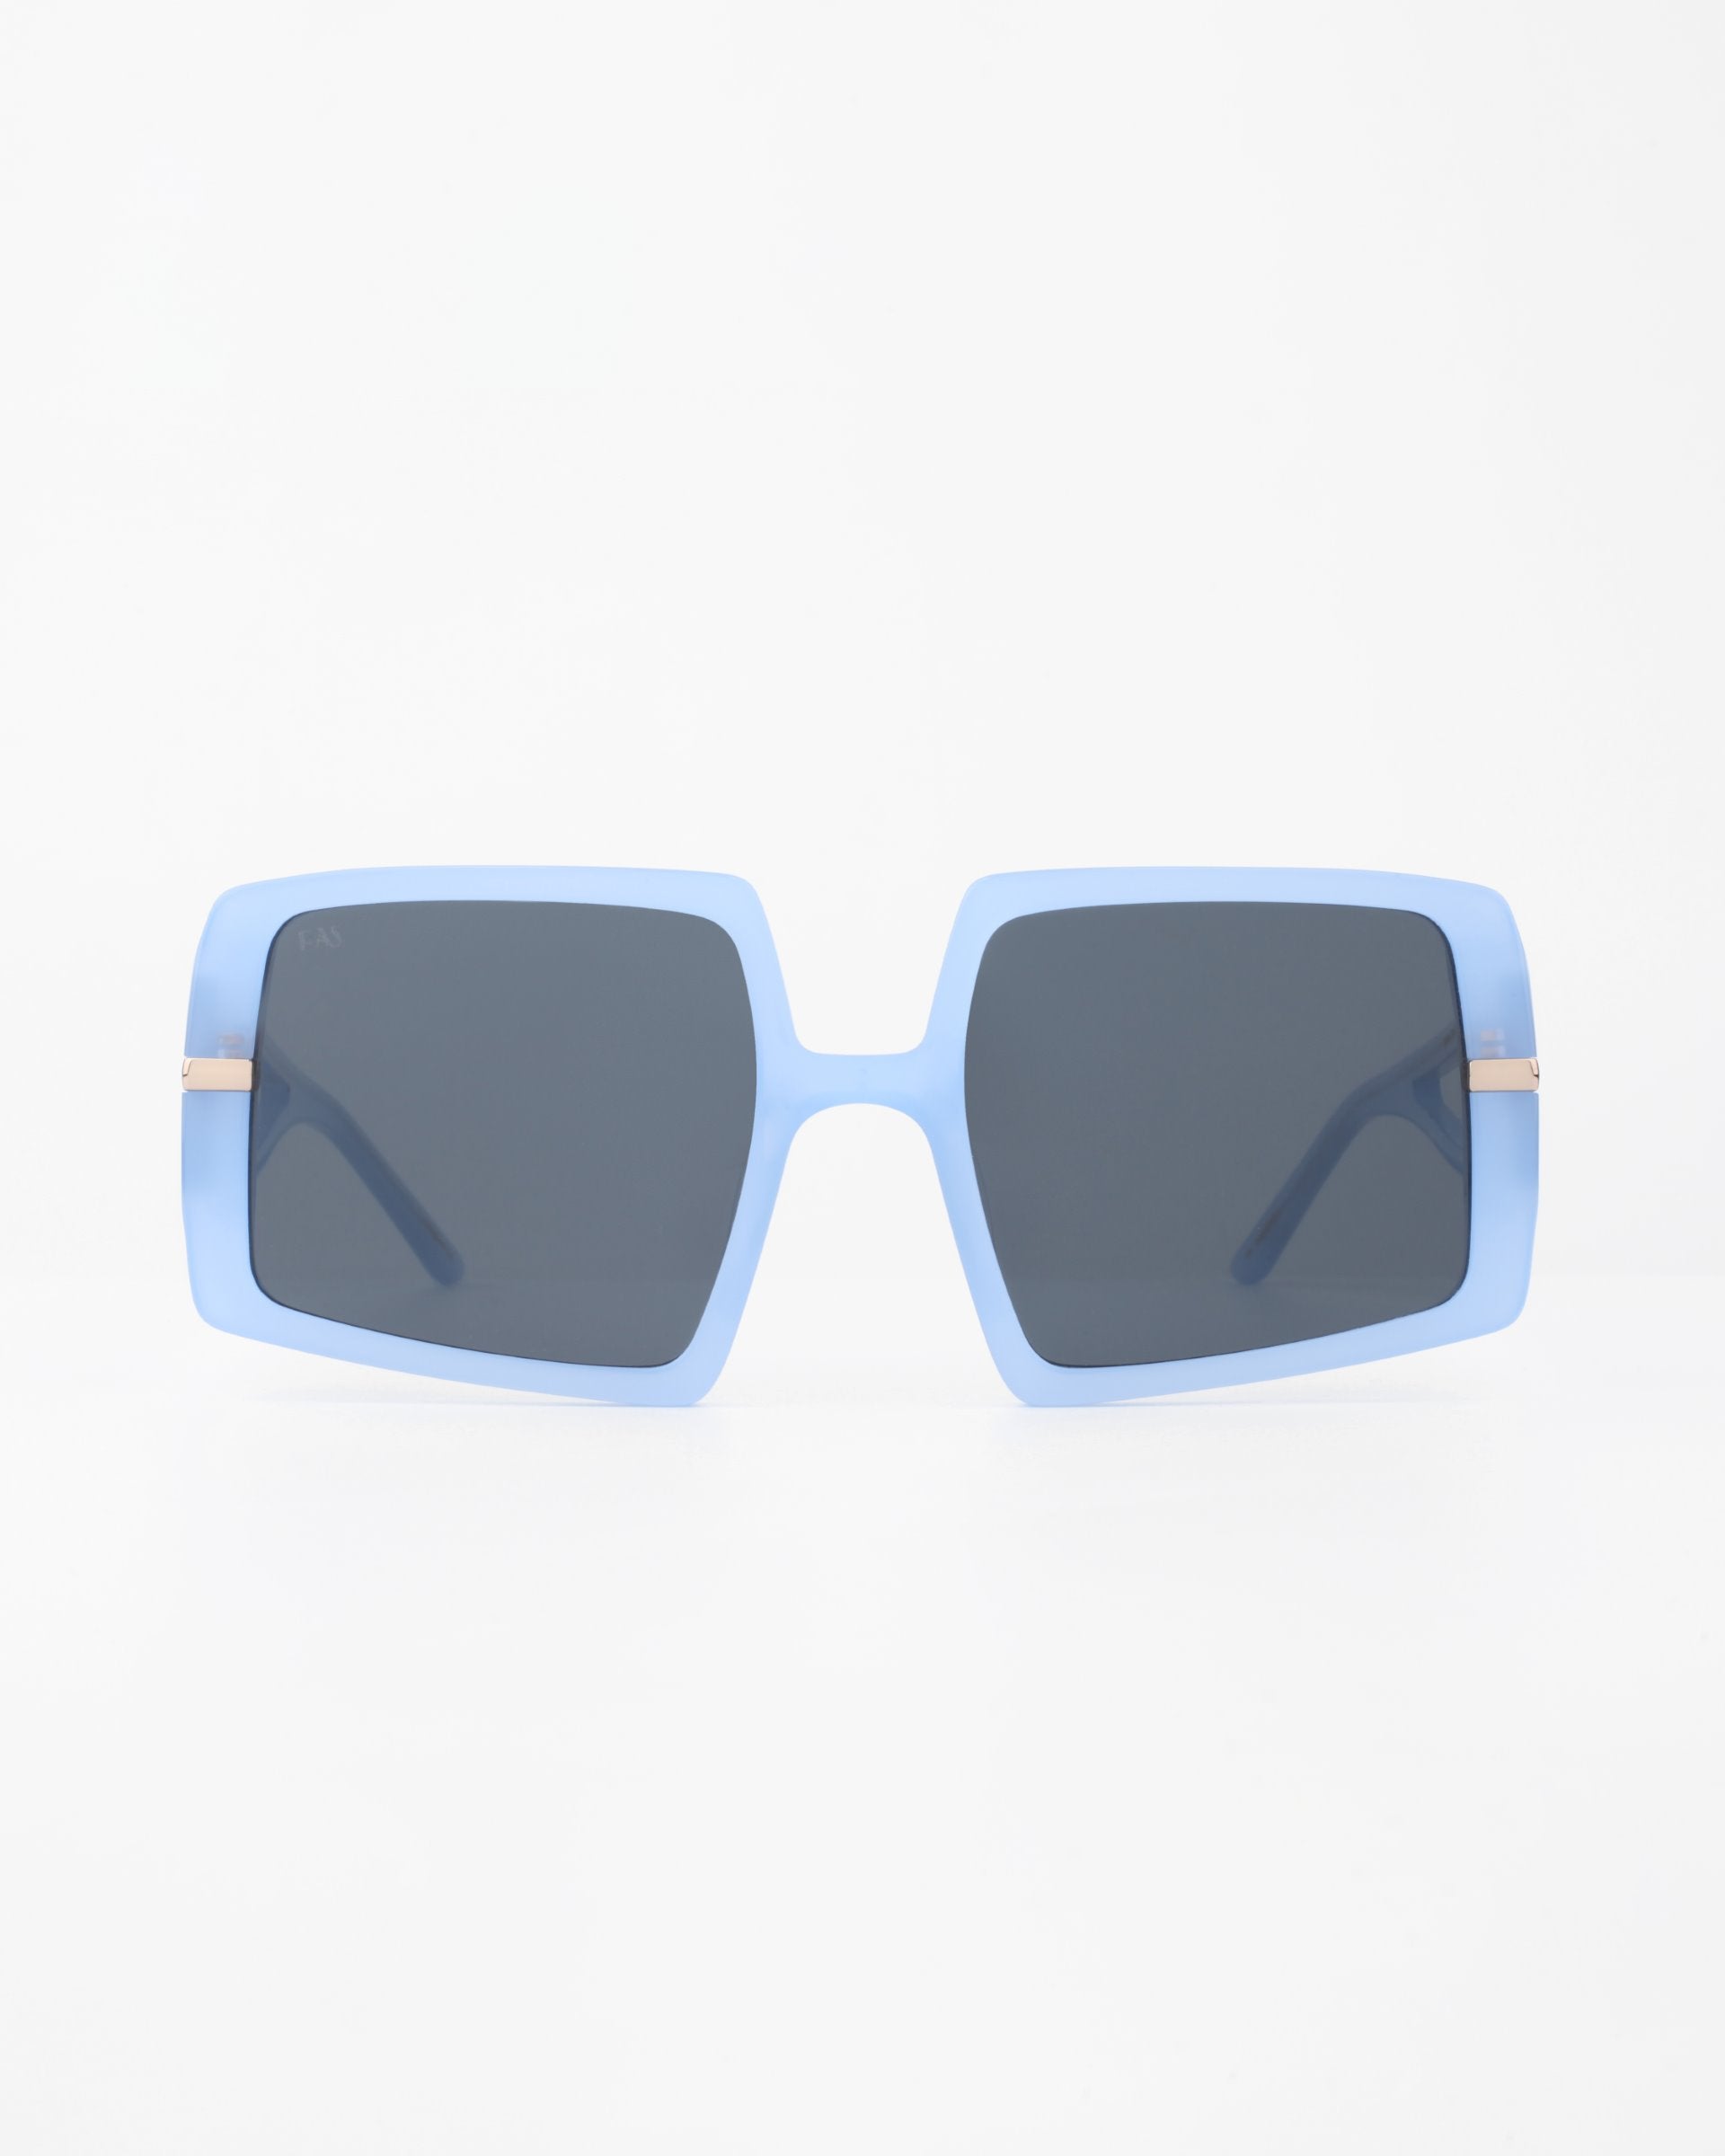 A pair of oversized rectangular For Art's Sake® Saturday sunglasses with light blue, plant-based acetate frames and dark, shatter-resistant nylon lenses positioned against a white background. The sunglasses have a bold, fashionable look with thick frames and slightly rounded edges.